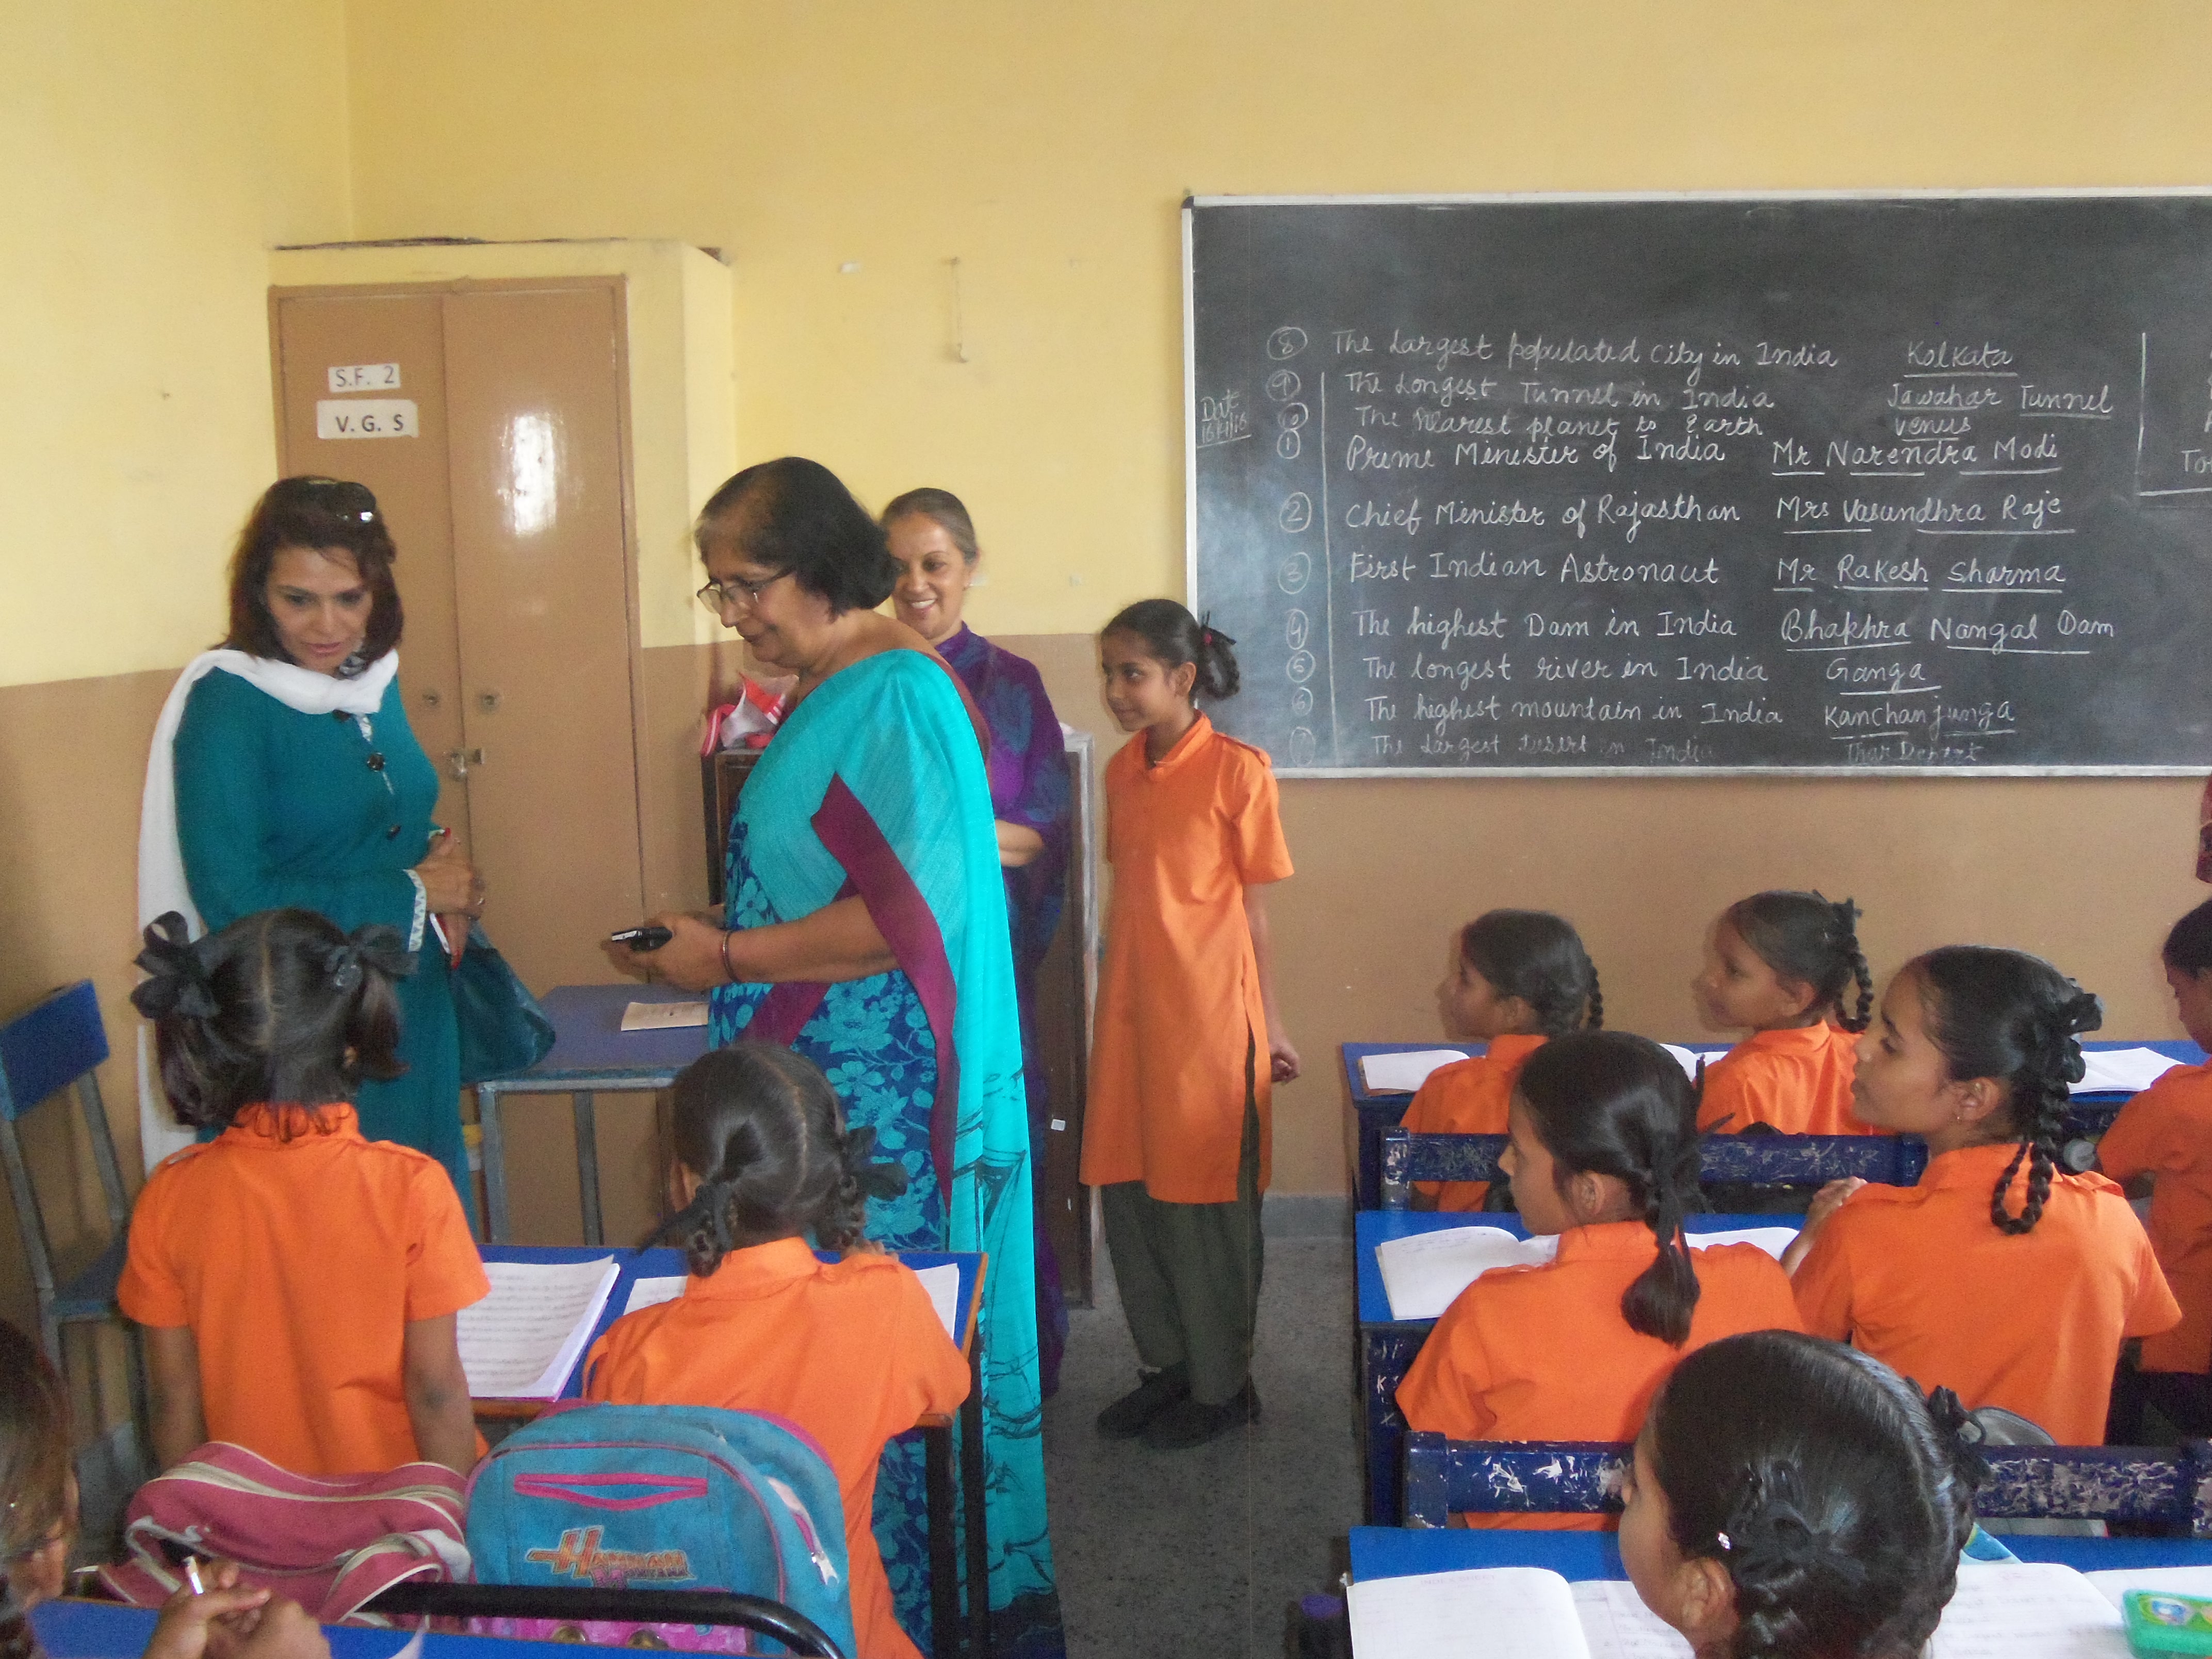 Vimukti students are smart, intelligent and confident